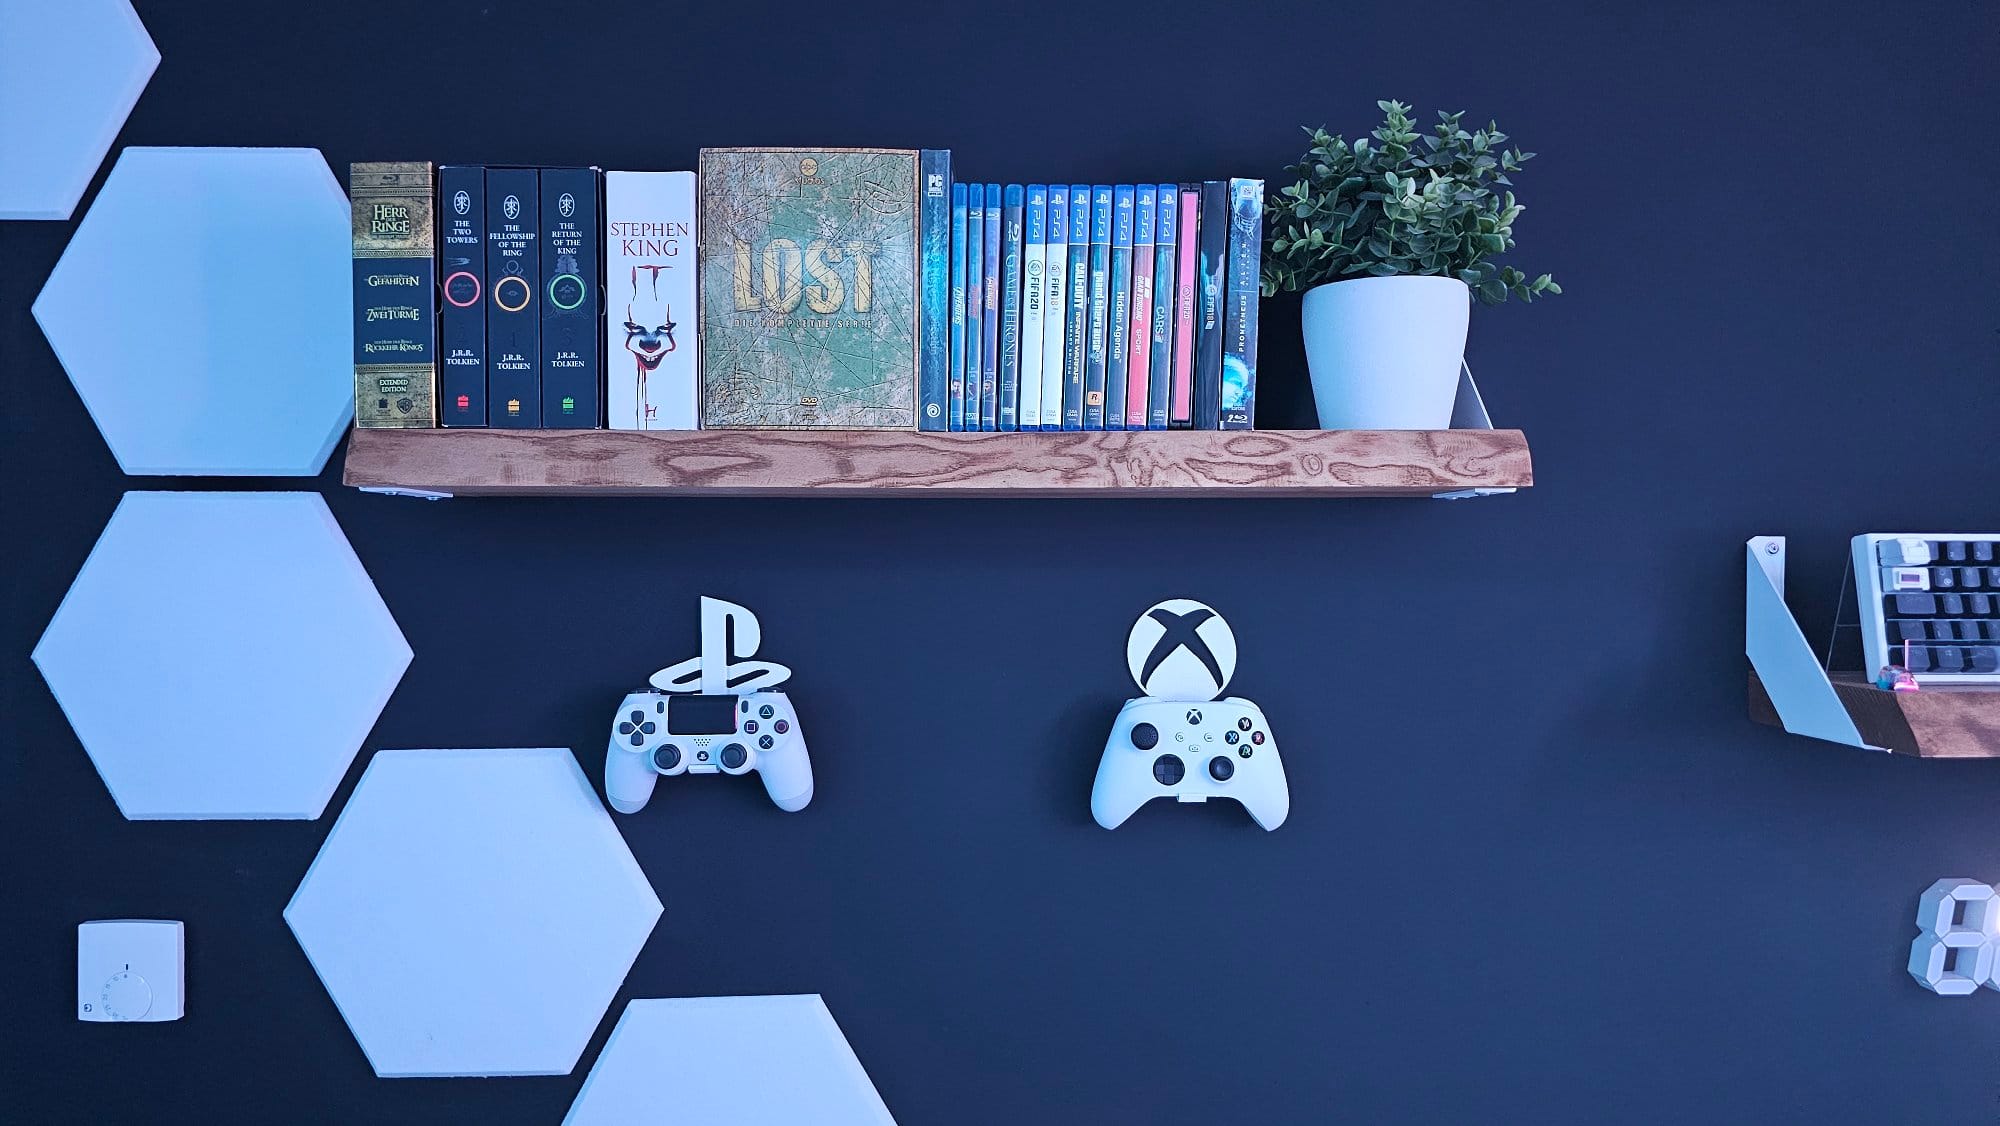 A dark-coloured wall decorated with a wooden shelf holding books, Blu-ray cases, a potted plant, and mounted hexagonal shapes, along with gaming controllers representing PlayStation and Xbox